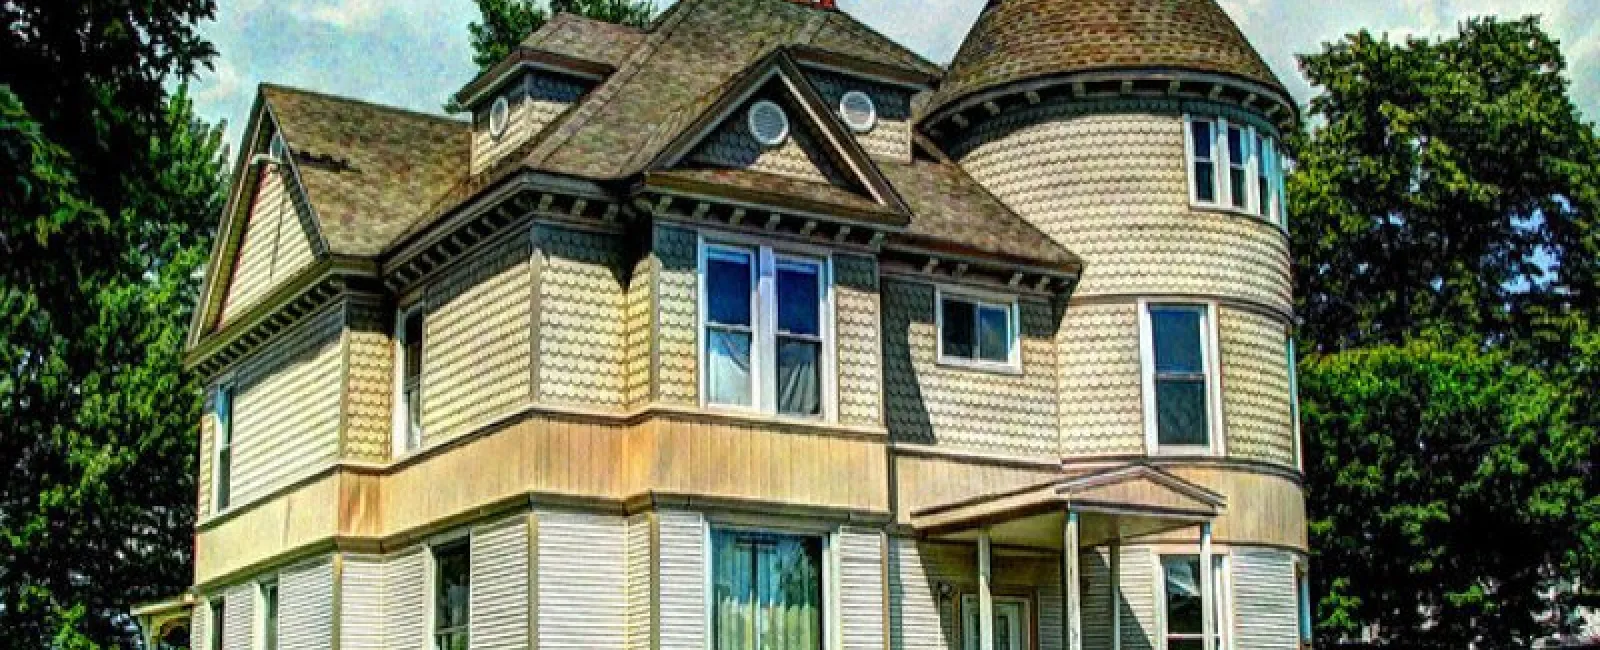 7 Advantages of Having a Steep Pitch Roof